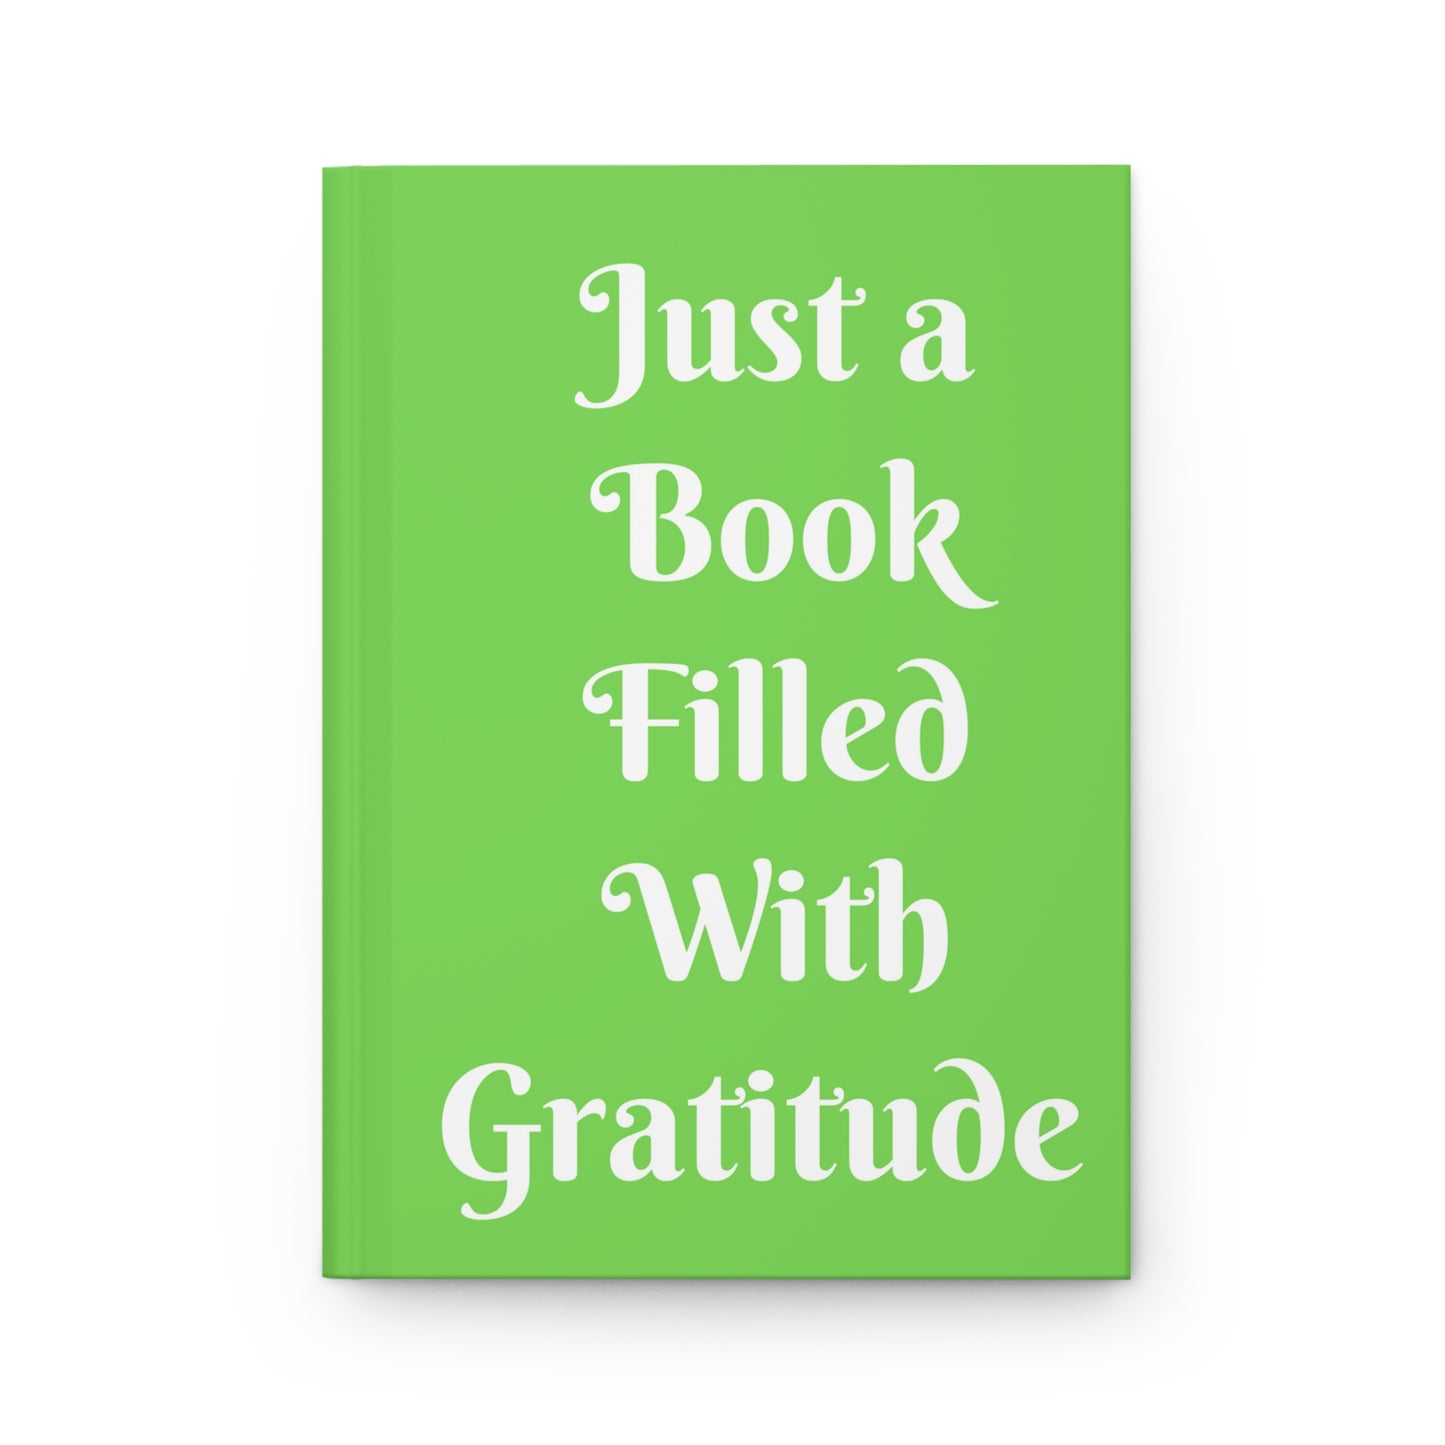 Gratitude Hardcover Notebook Journal - Daily Reflection, Mindfulness, Self Care, Wellness, Affirmations, 6 Month Diary, 5.75"x7.5"